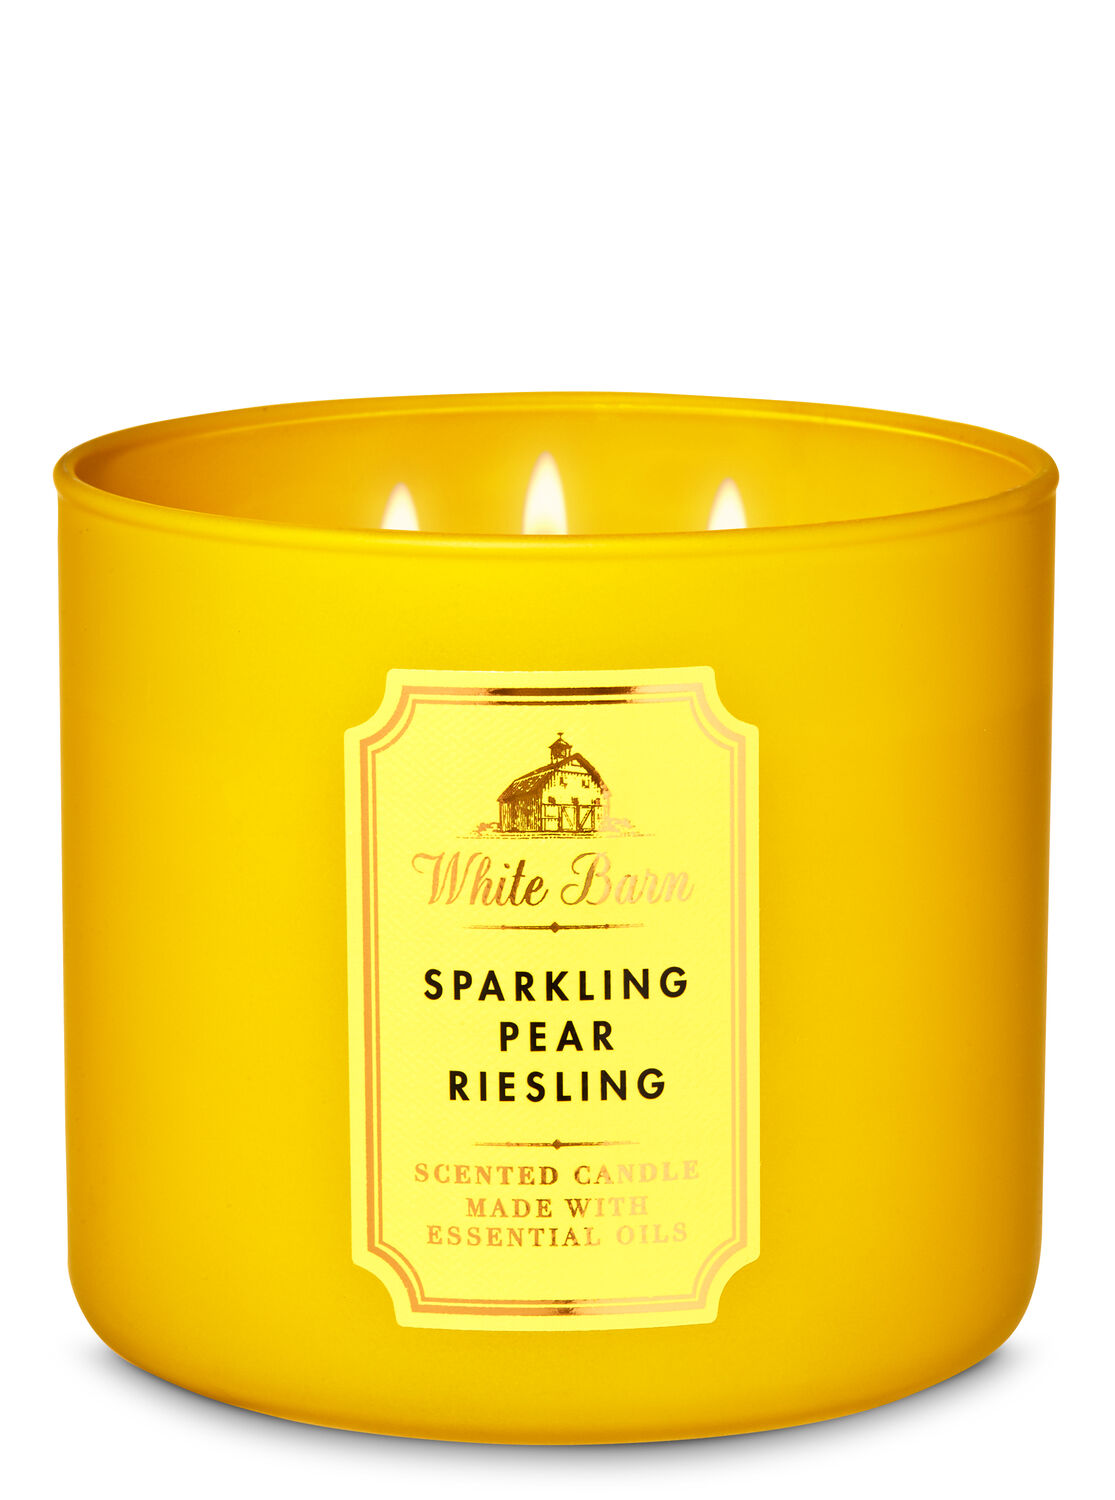 Sparkling Pear Riesling Bath & Body Works 14.5 Oz 3-Wick Candle 